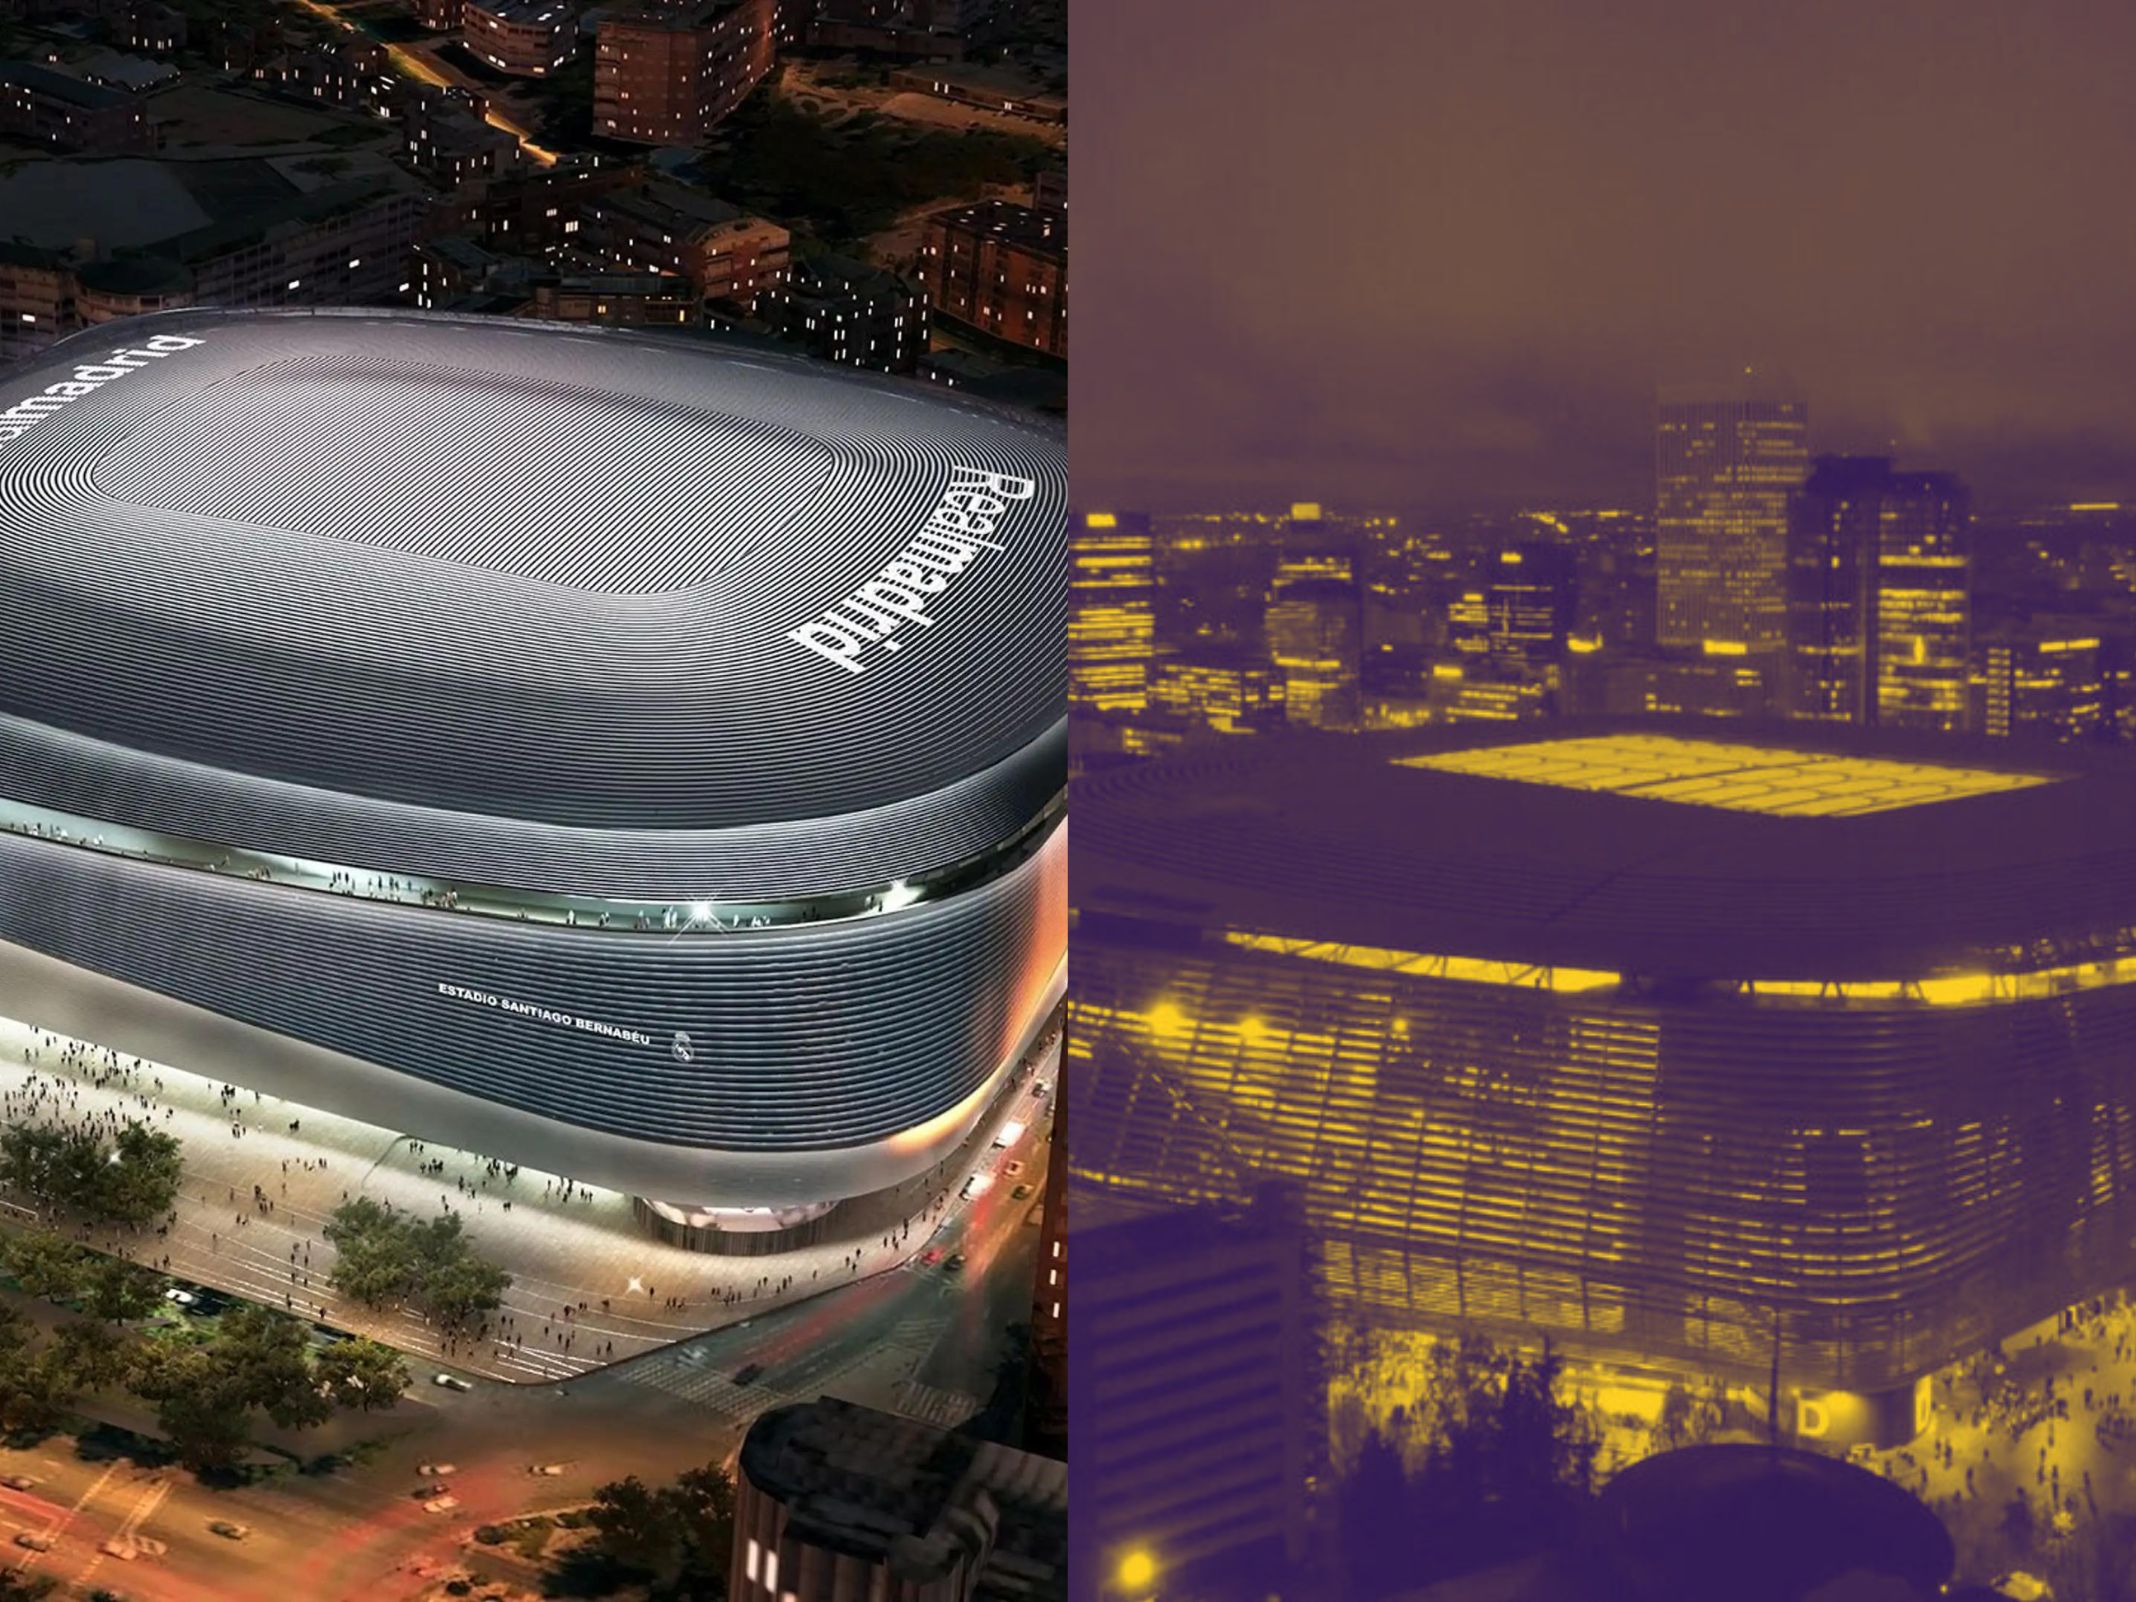 Fans Feel Misled by Viral Aerial Photo of New Santiago Bernabeu